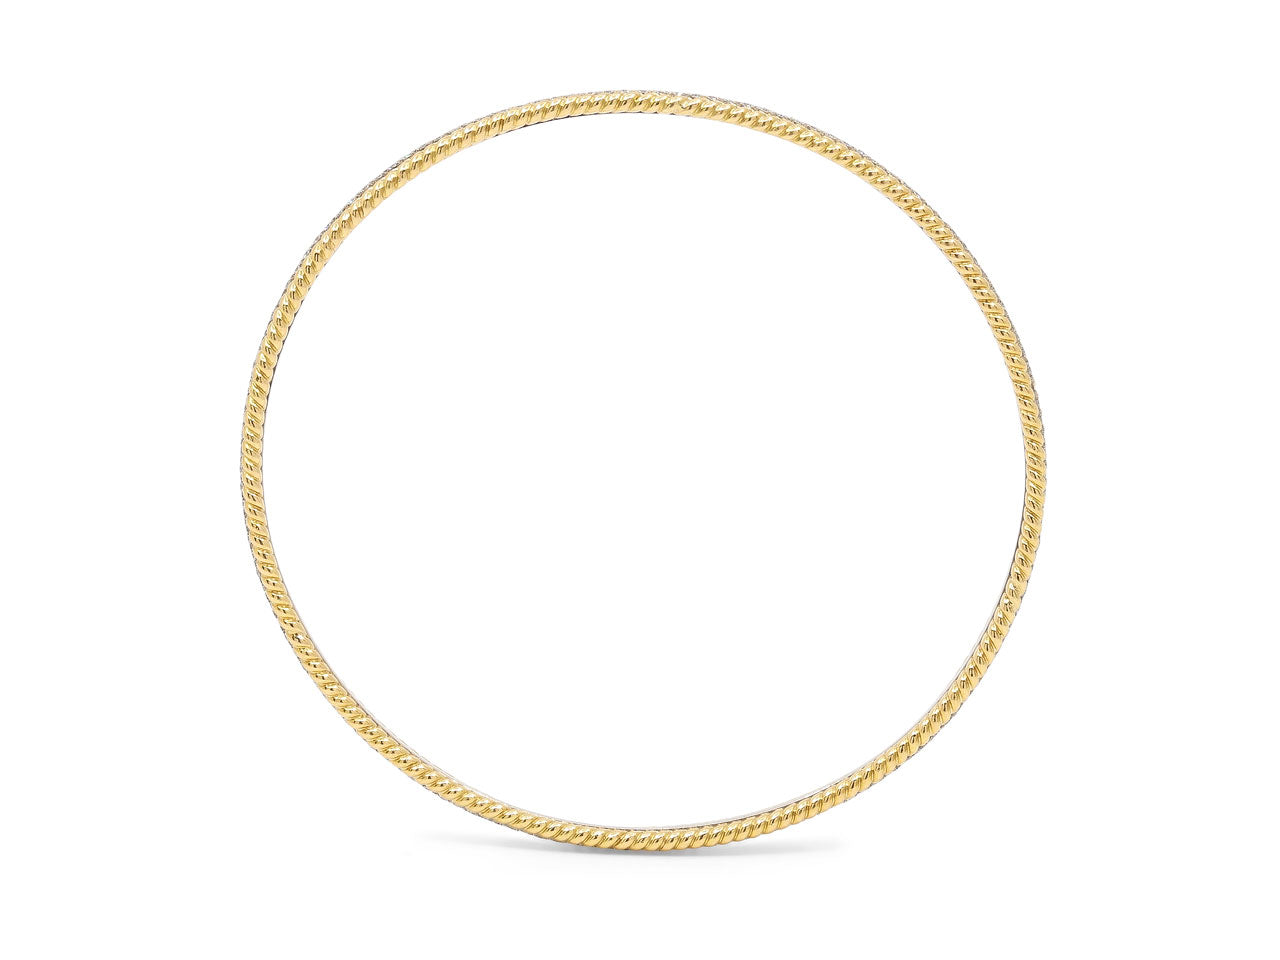 Tiffany & Co. Schlumberger 'Rope' Diamond Bangle in Platinum and 18K Gold